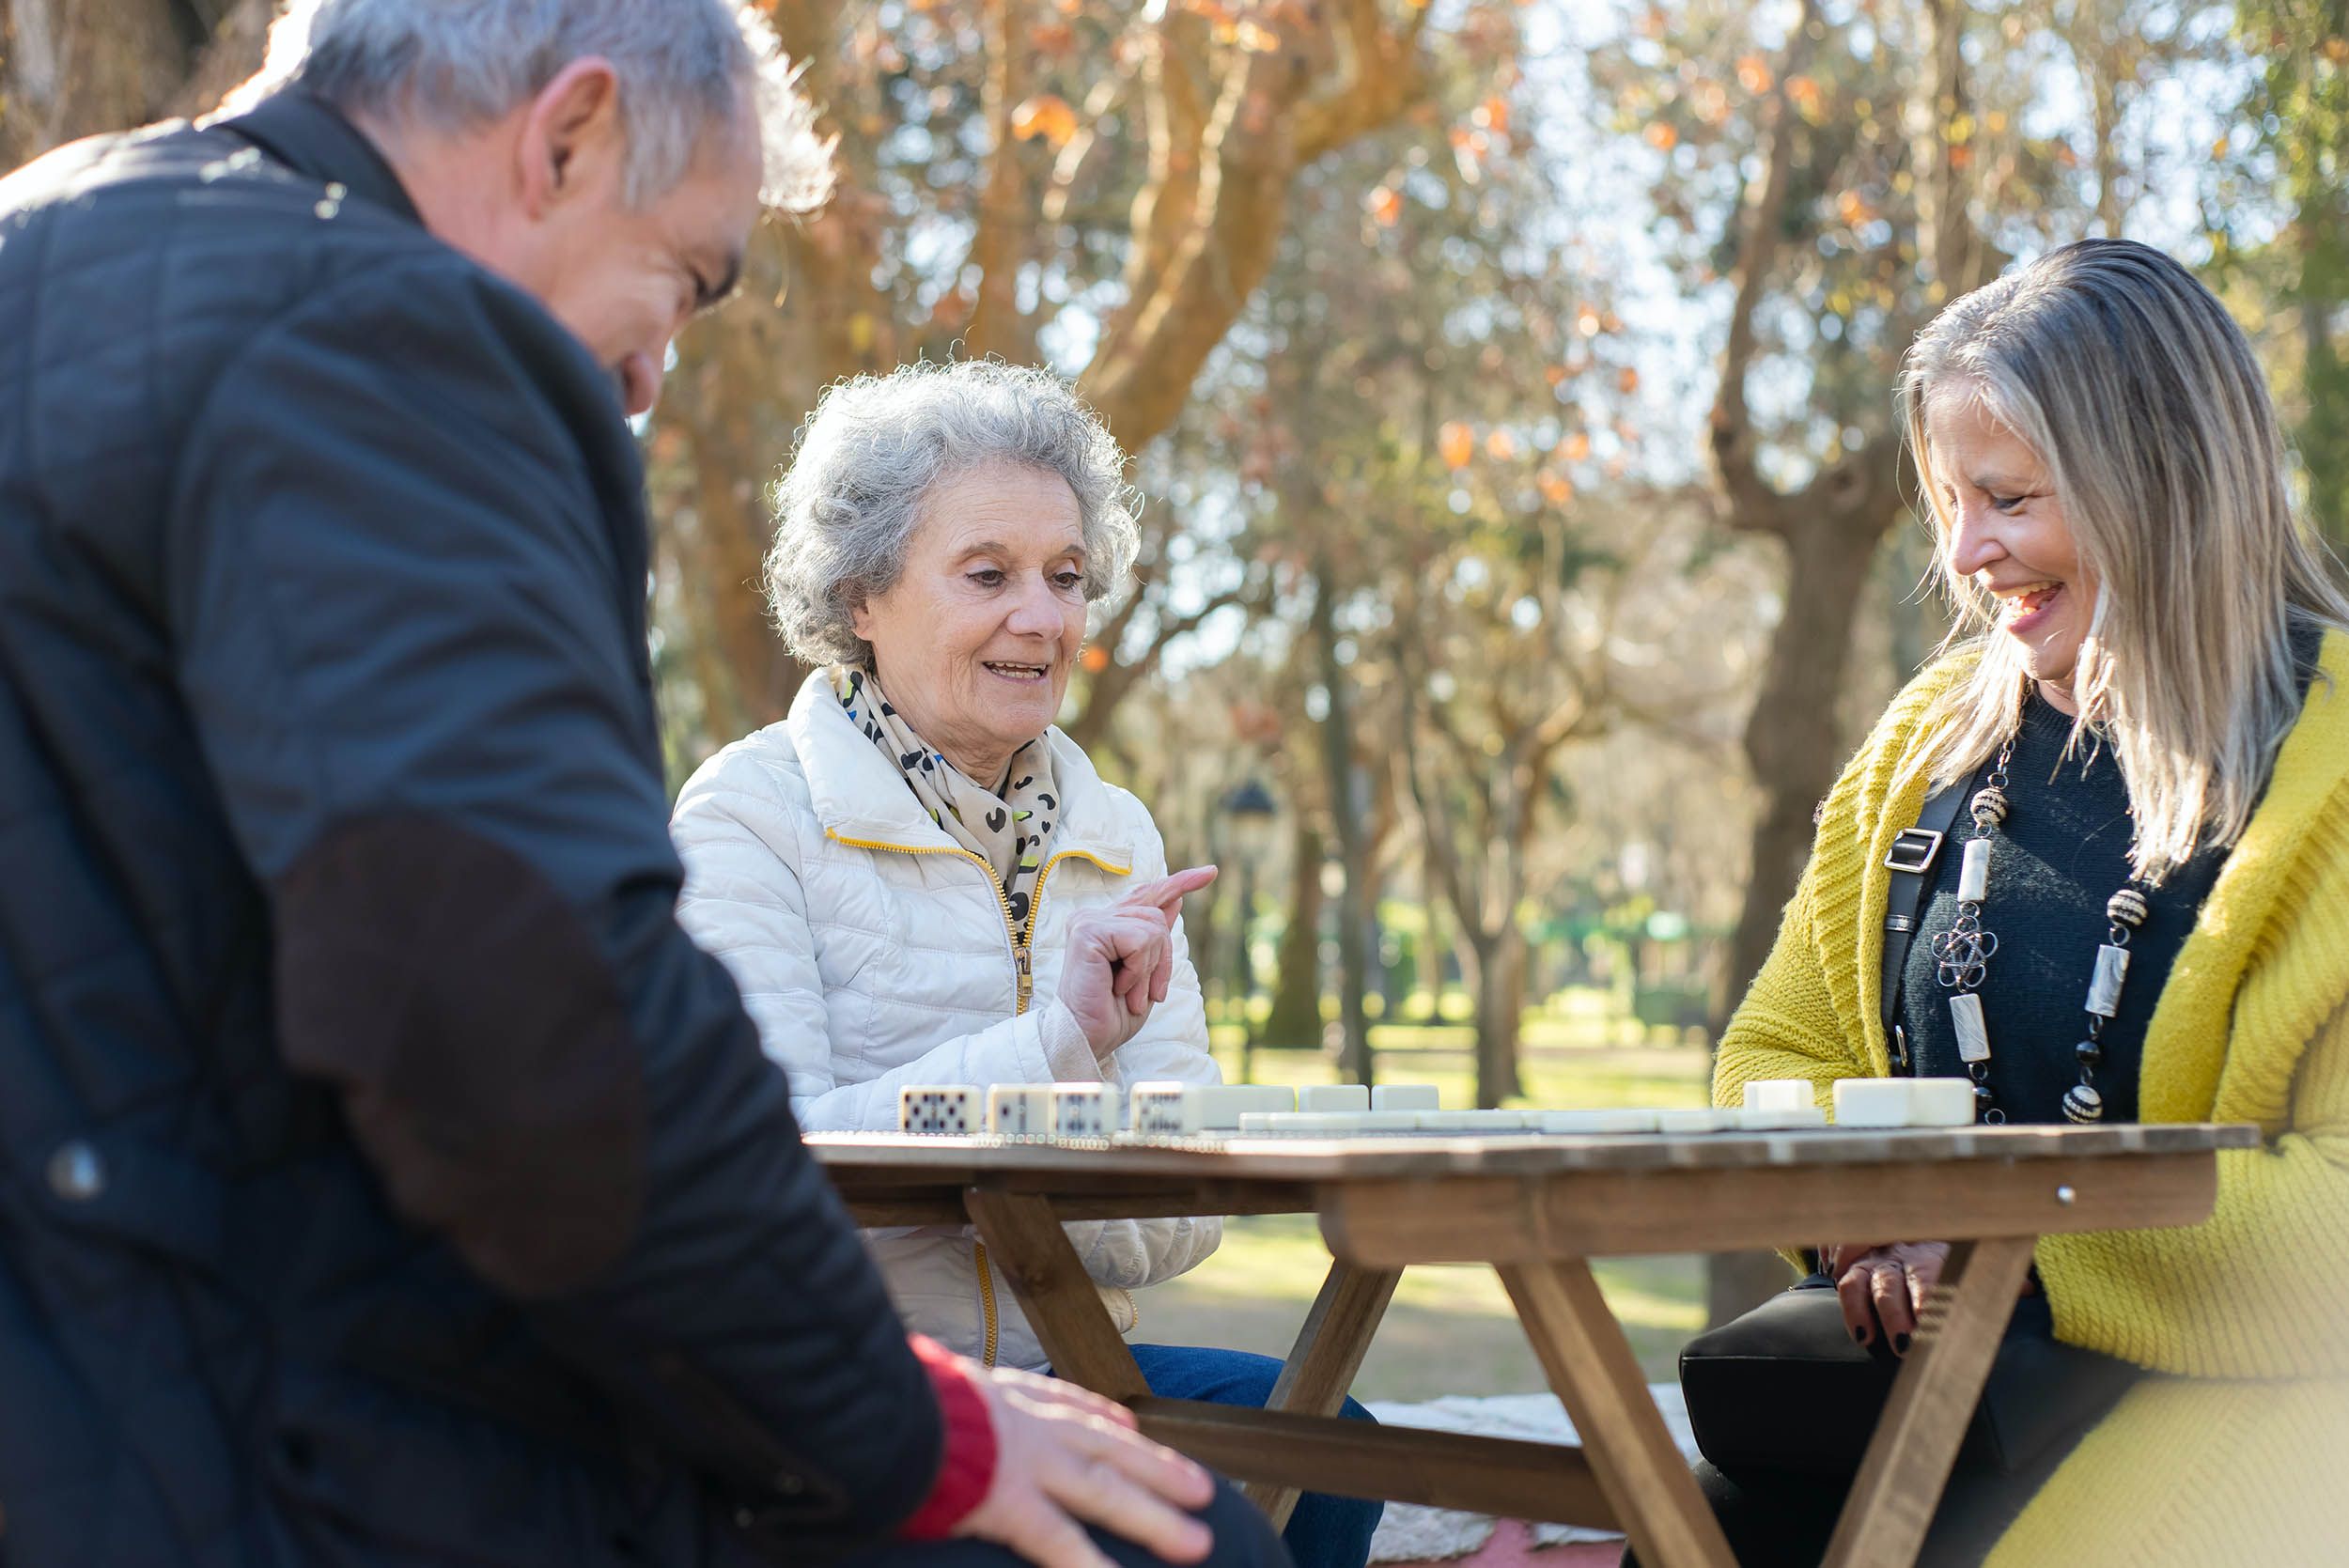 Group of elderly friends playing a board game outdoors